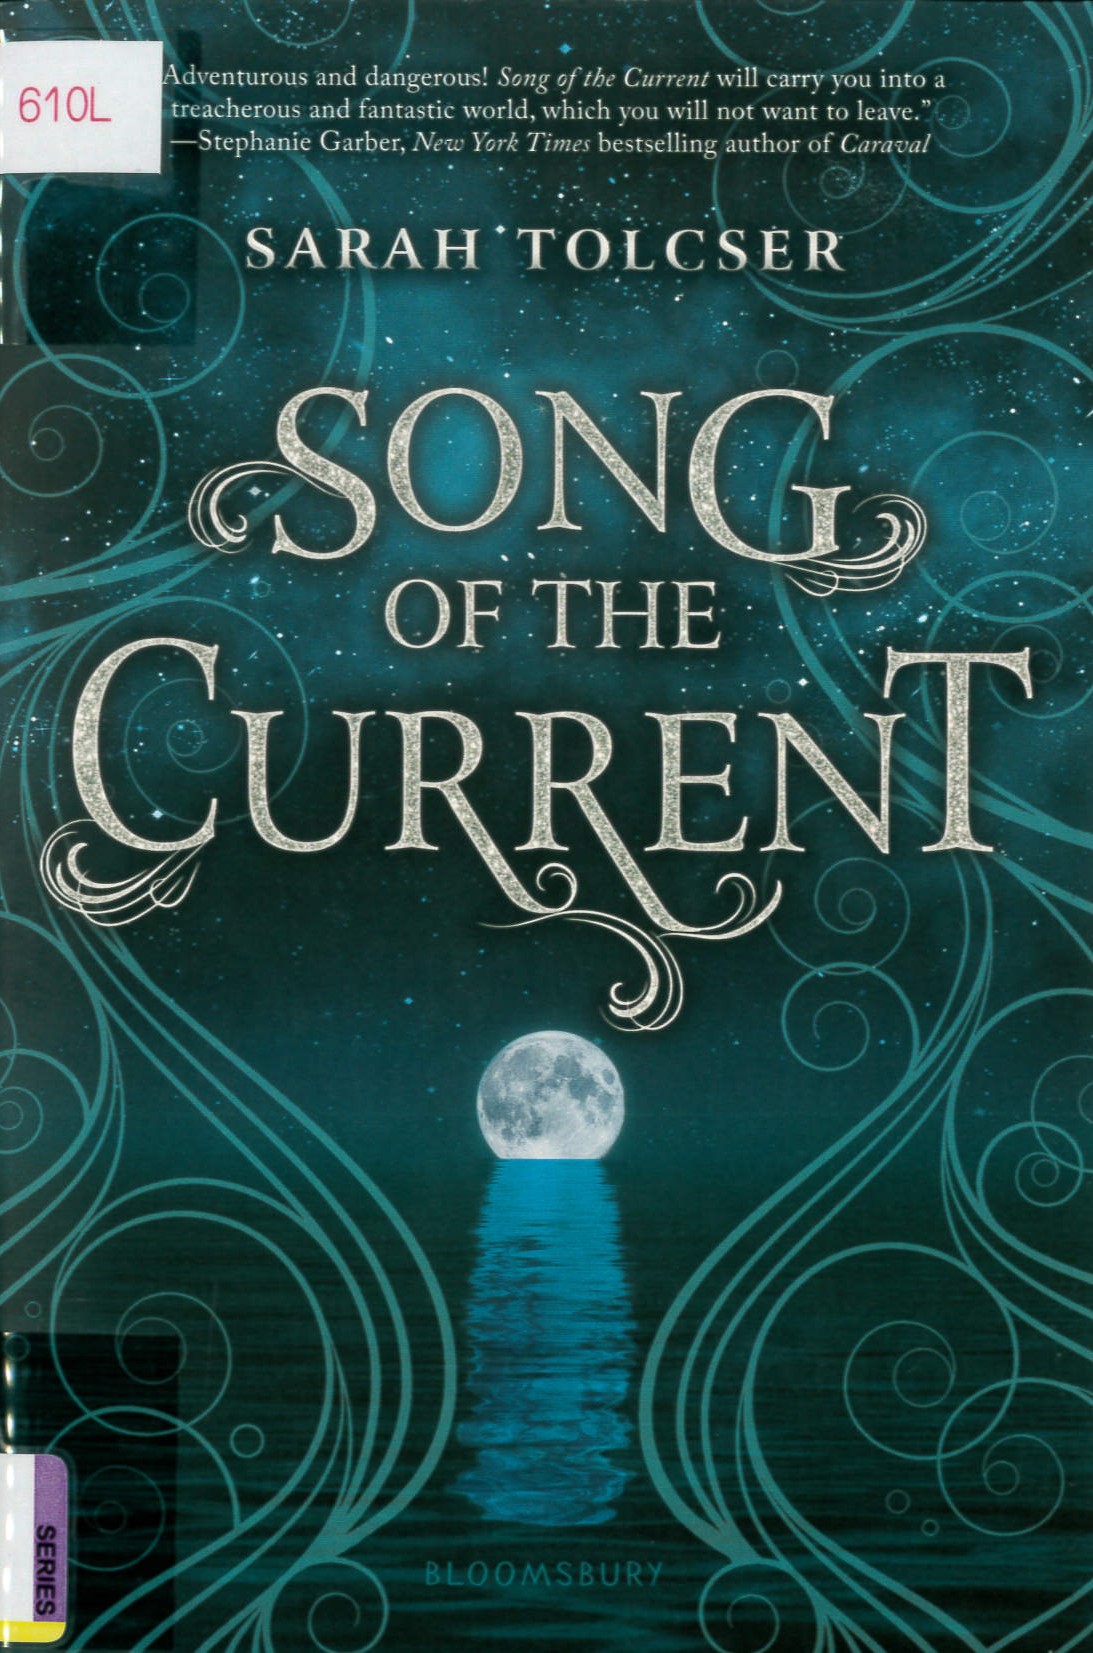 Song of the current /